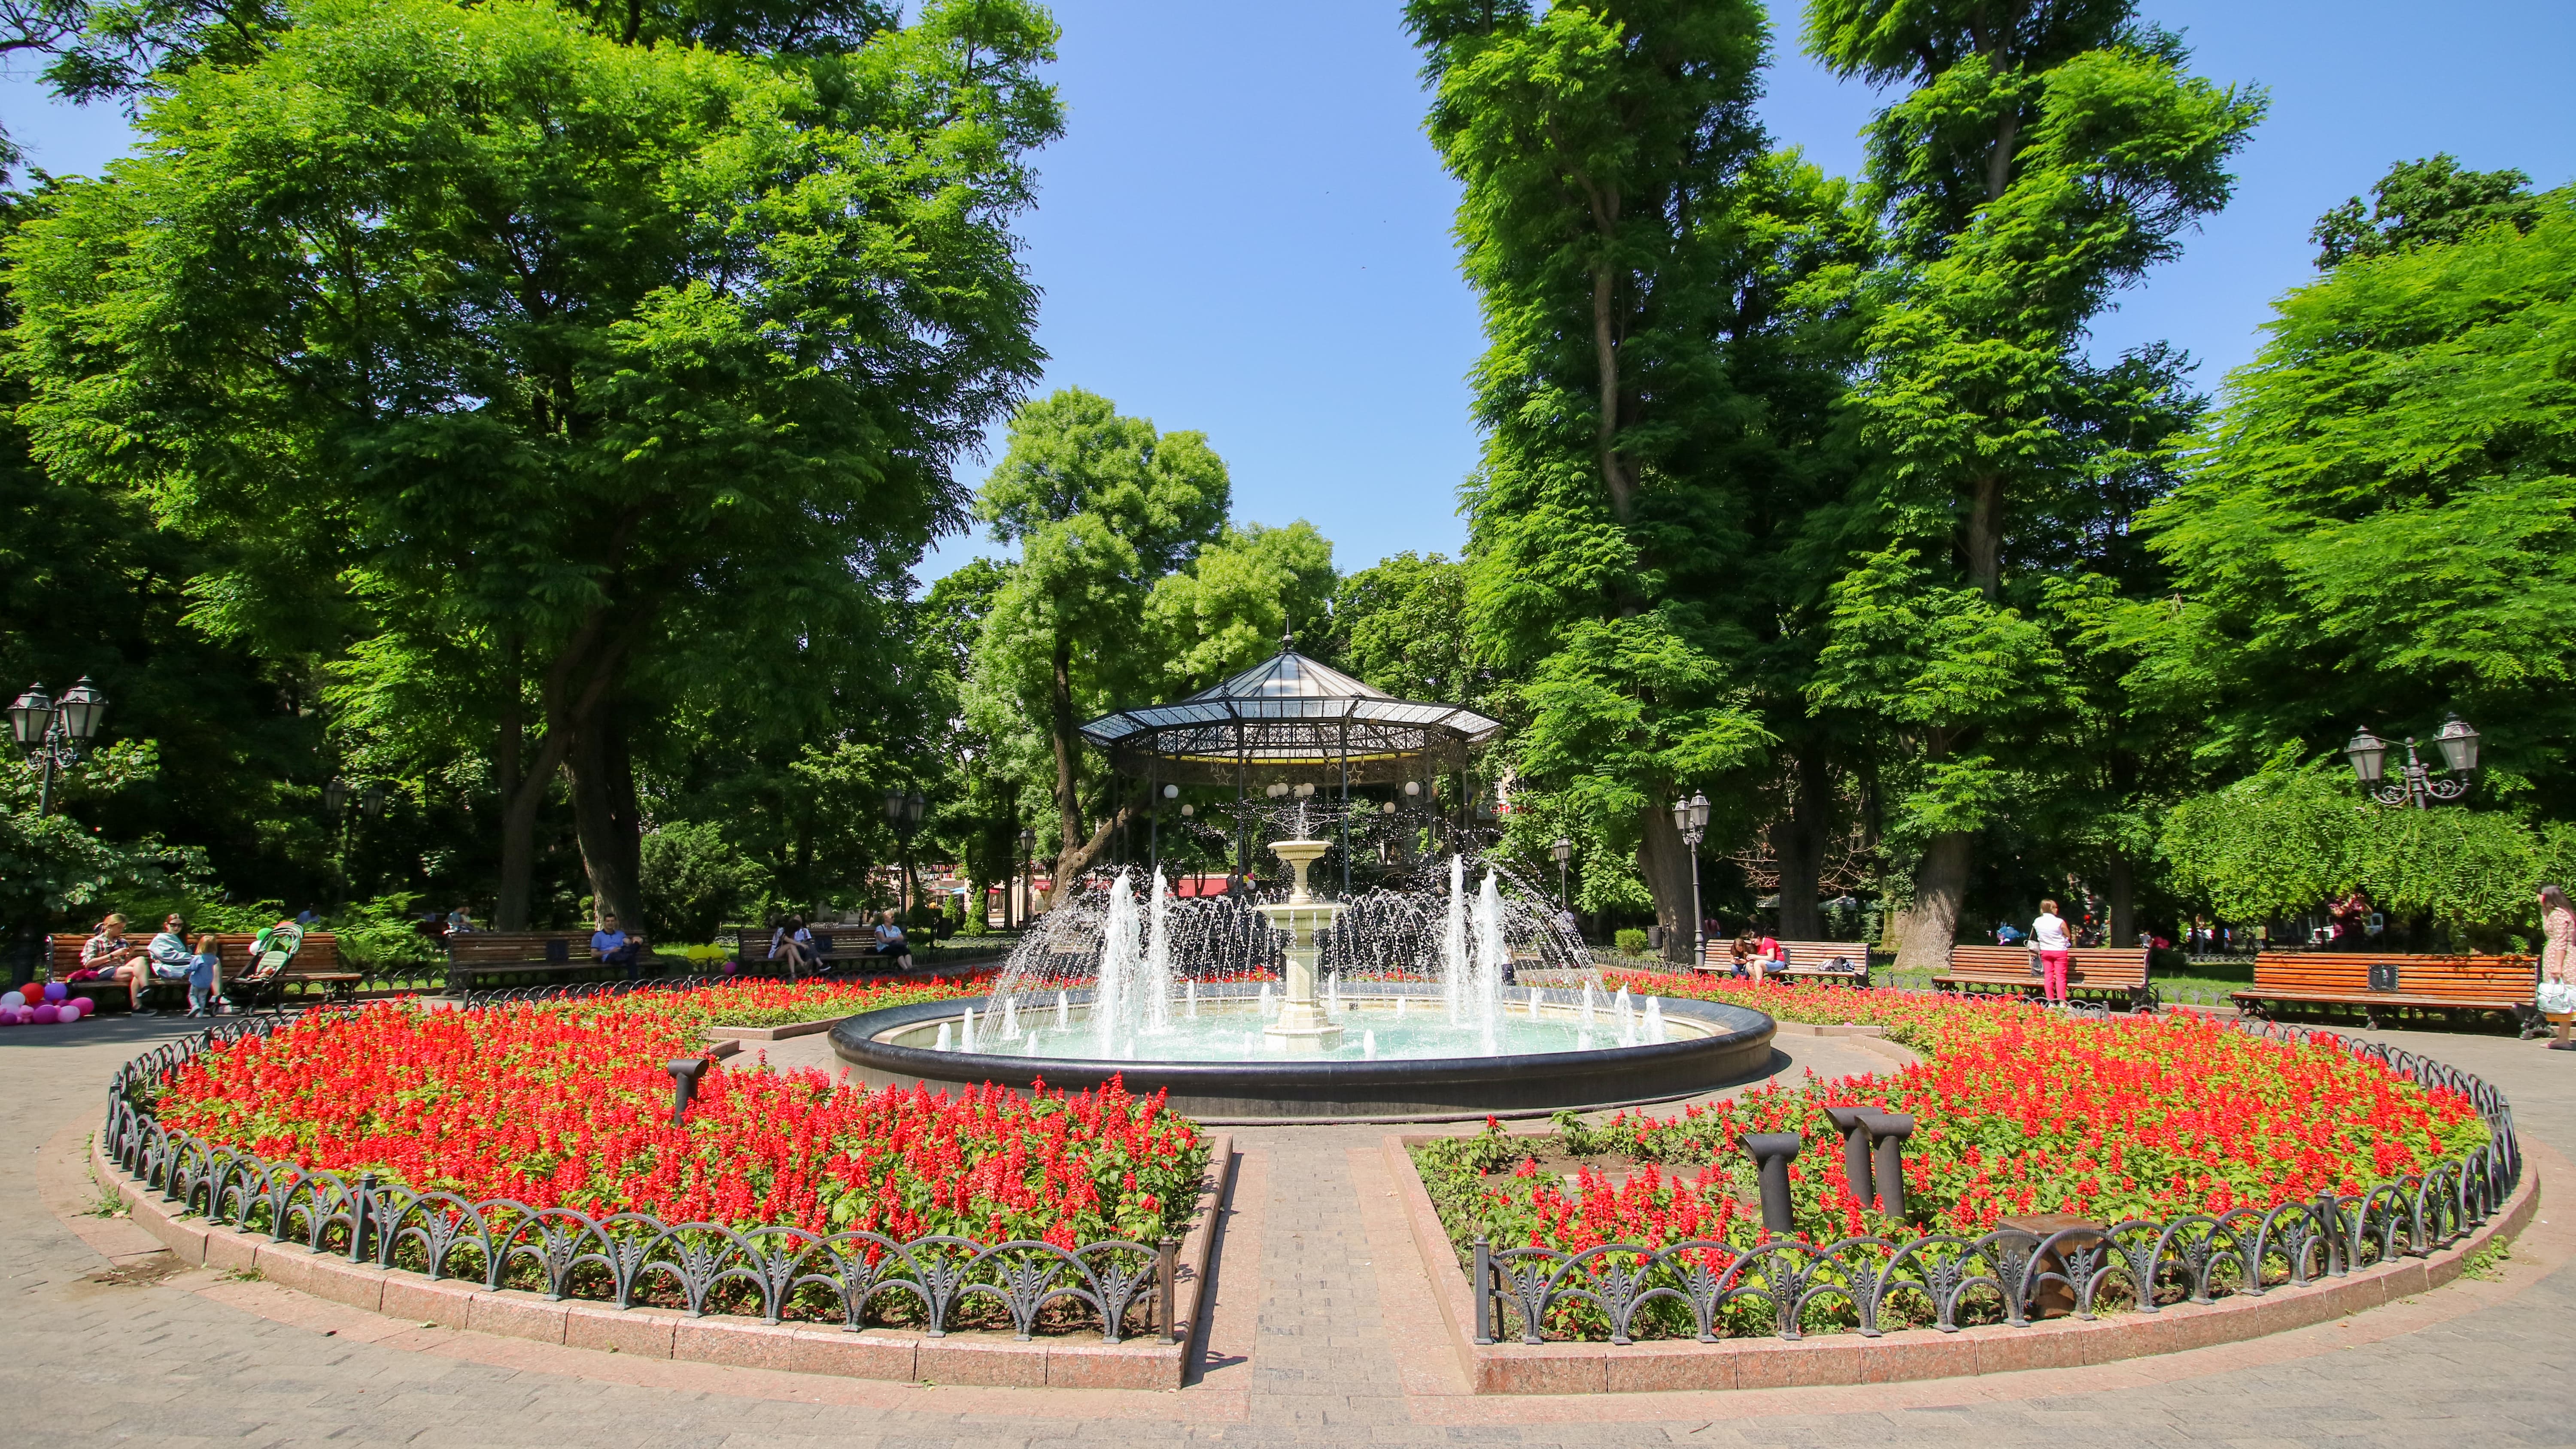 3 DAYS IN ODESSA: BEST THINGS TO DO